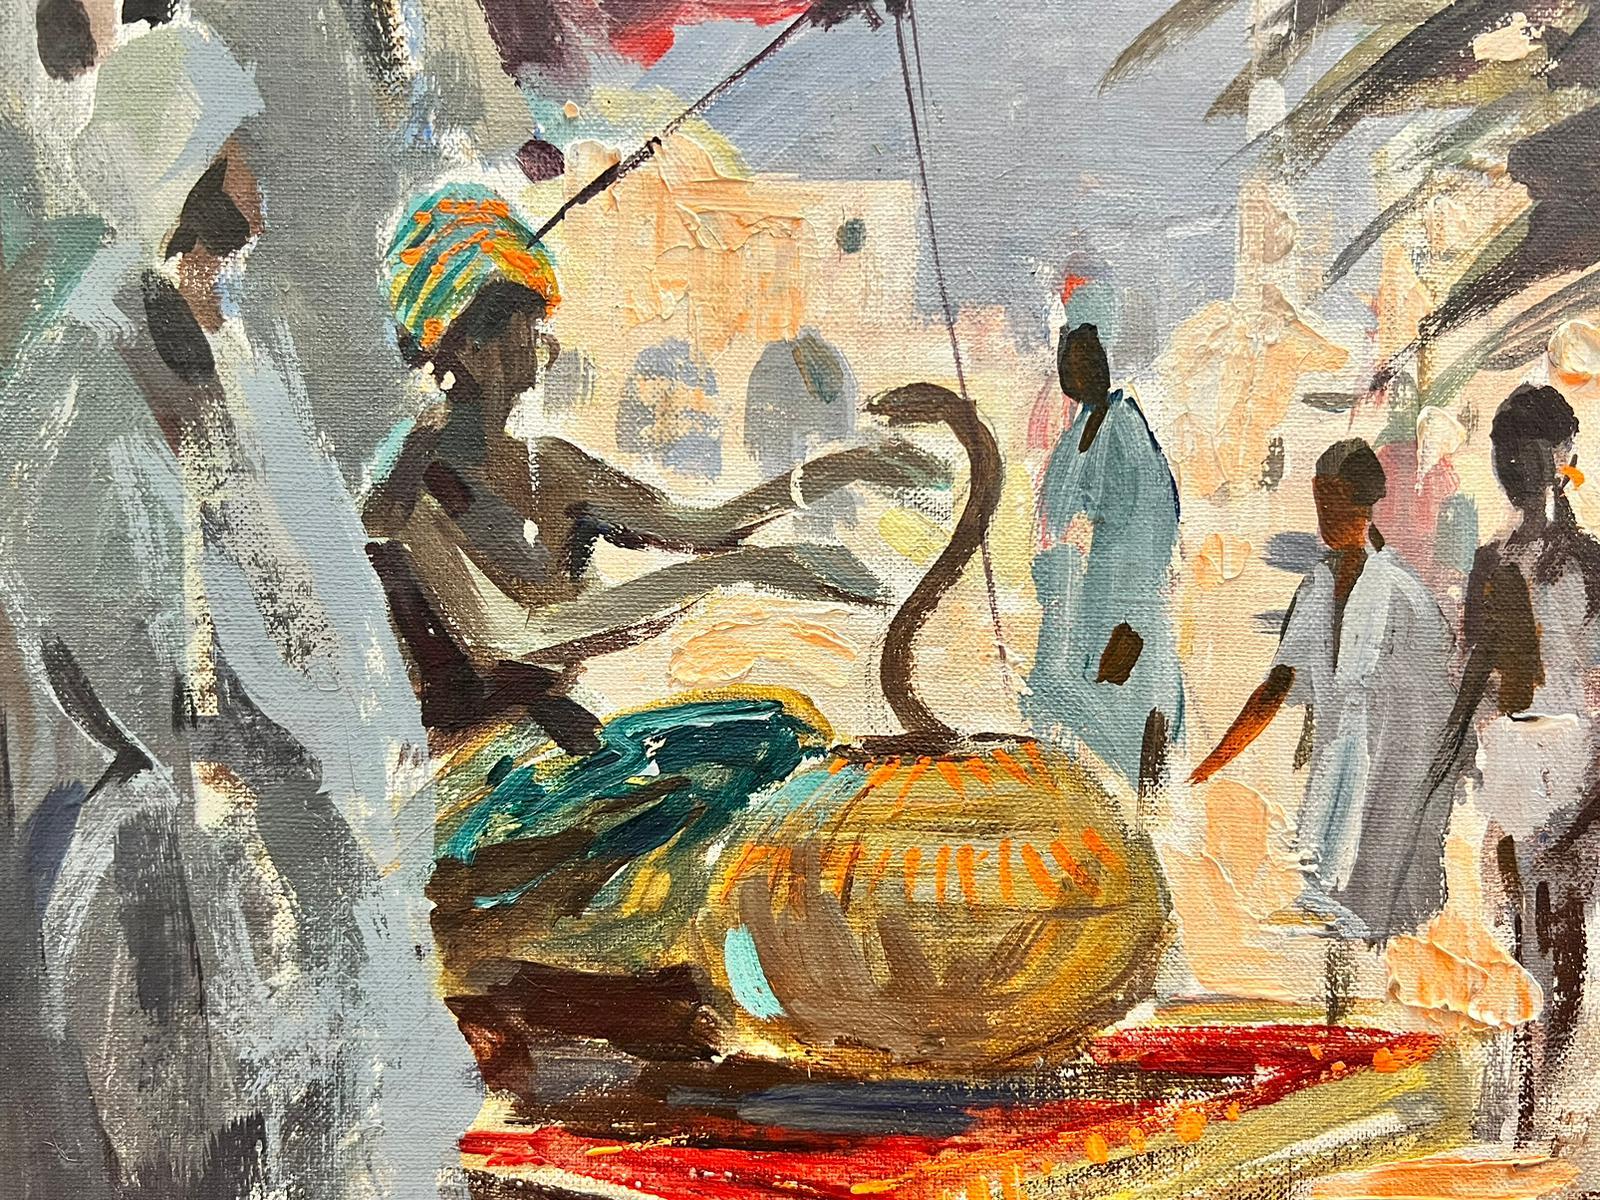 Snake Charmer Busy Market Place British Mid 20th Century Impressionist Painting For Sale 2